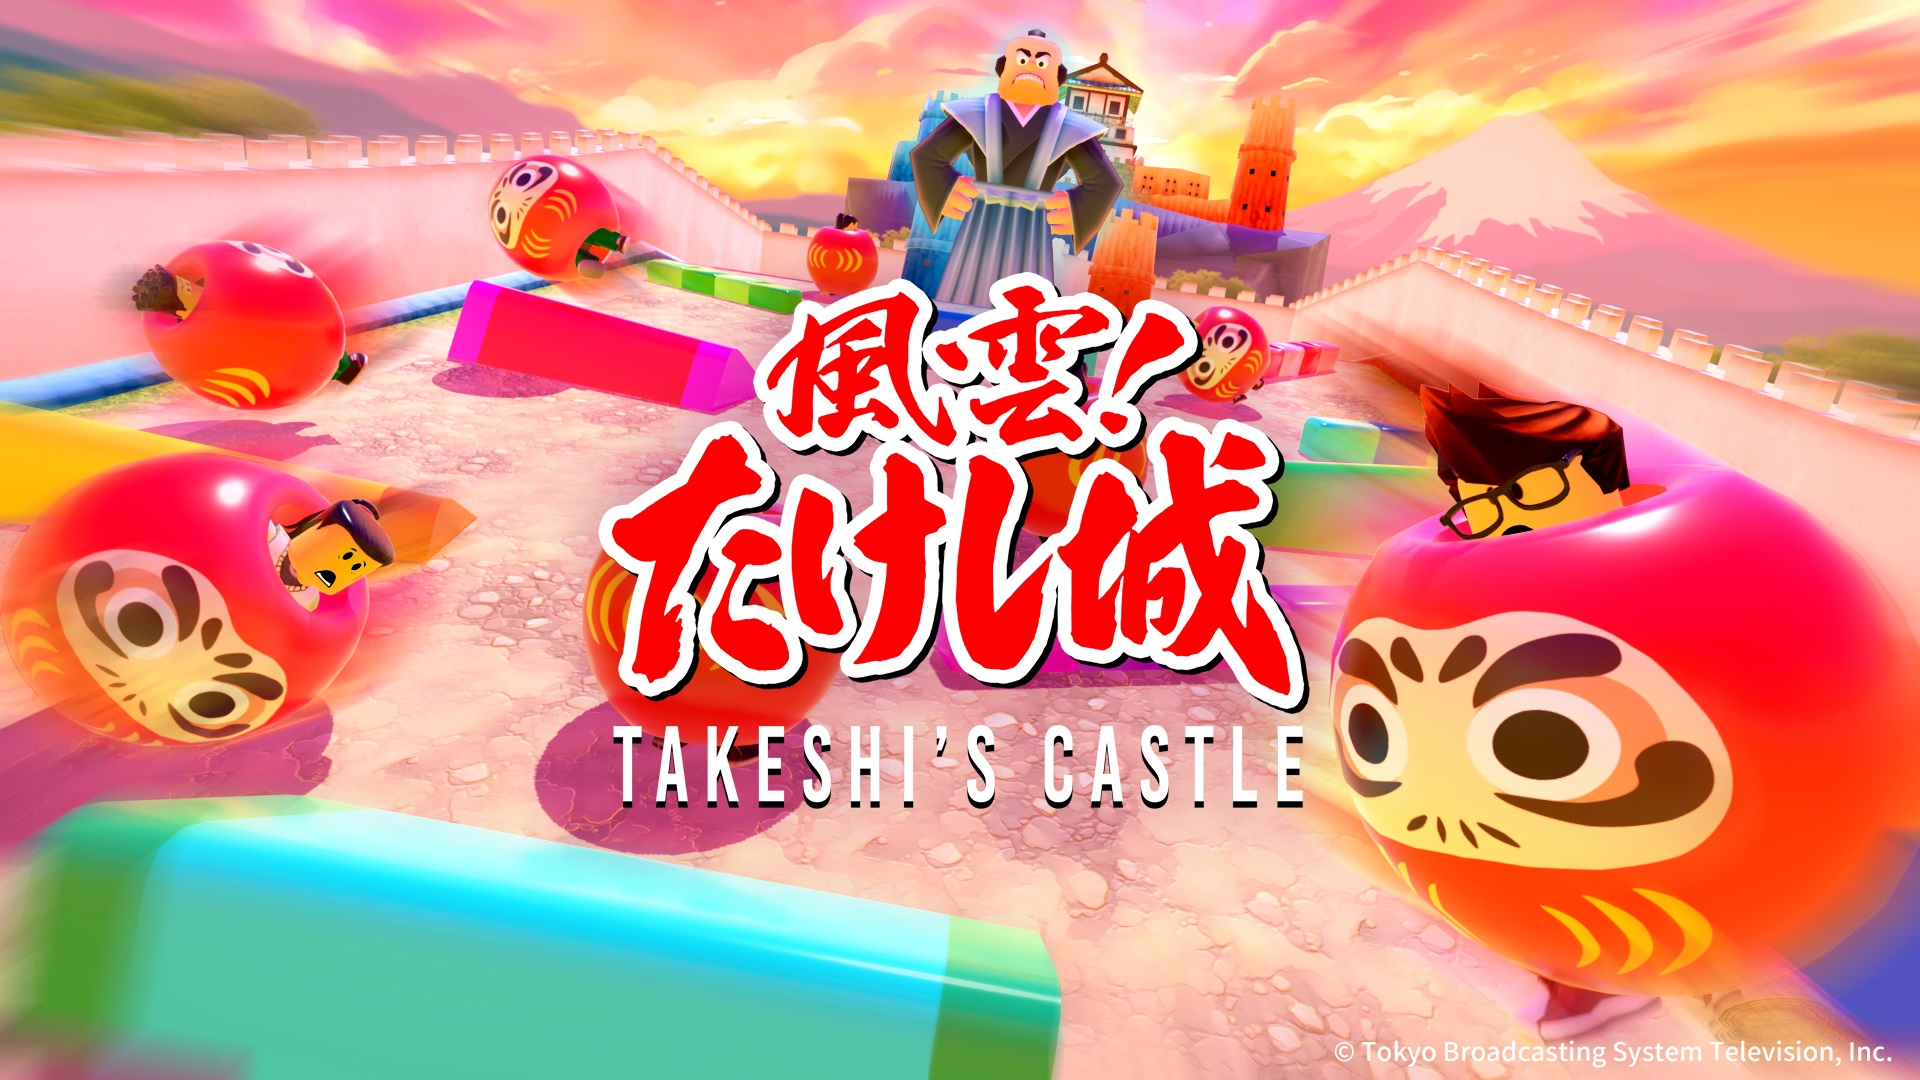 Takeshi’s Castle video game officially announced